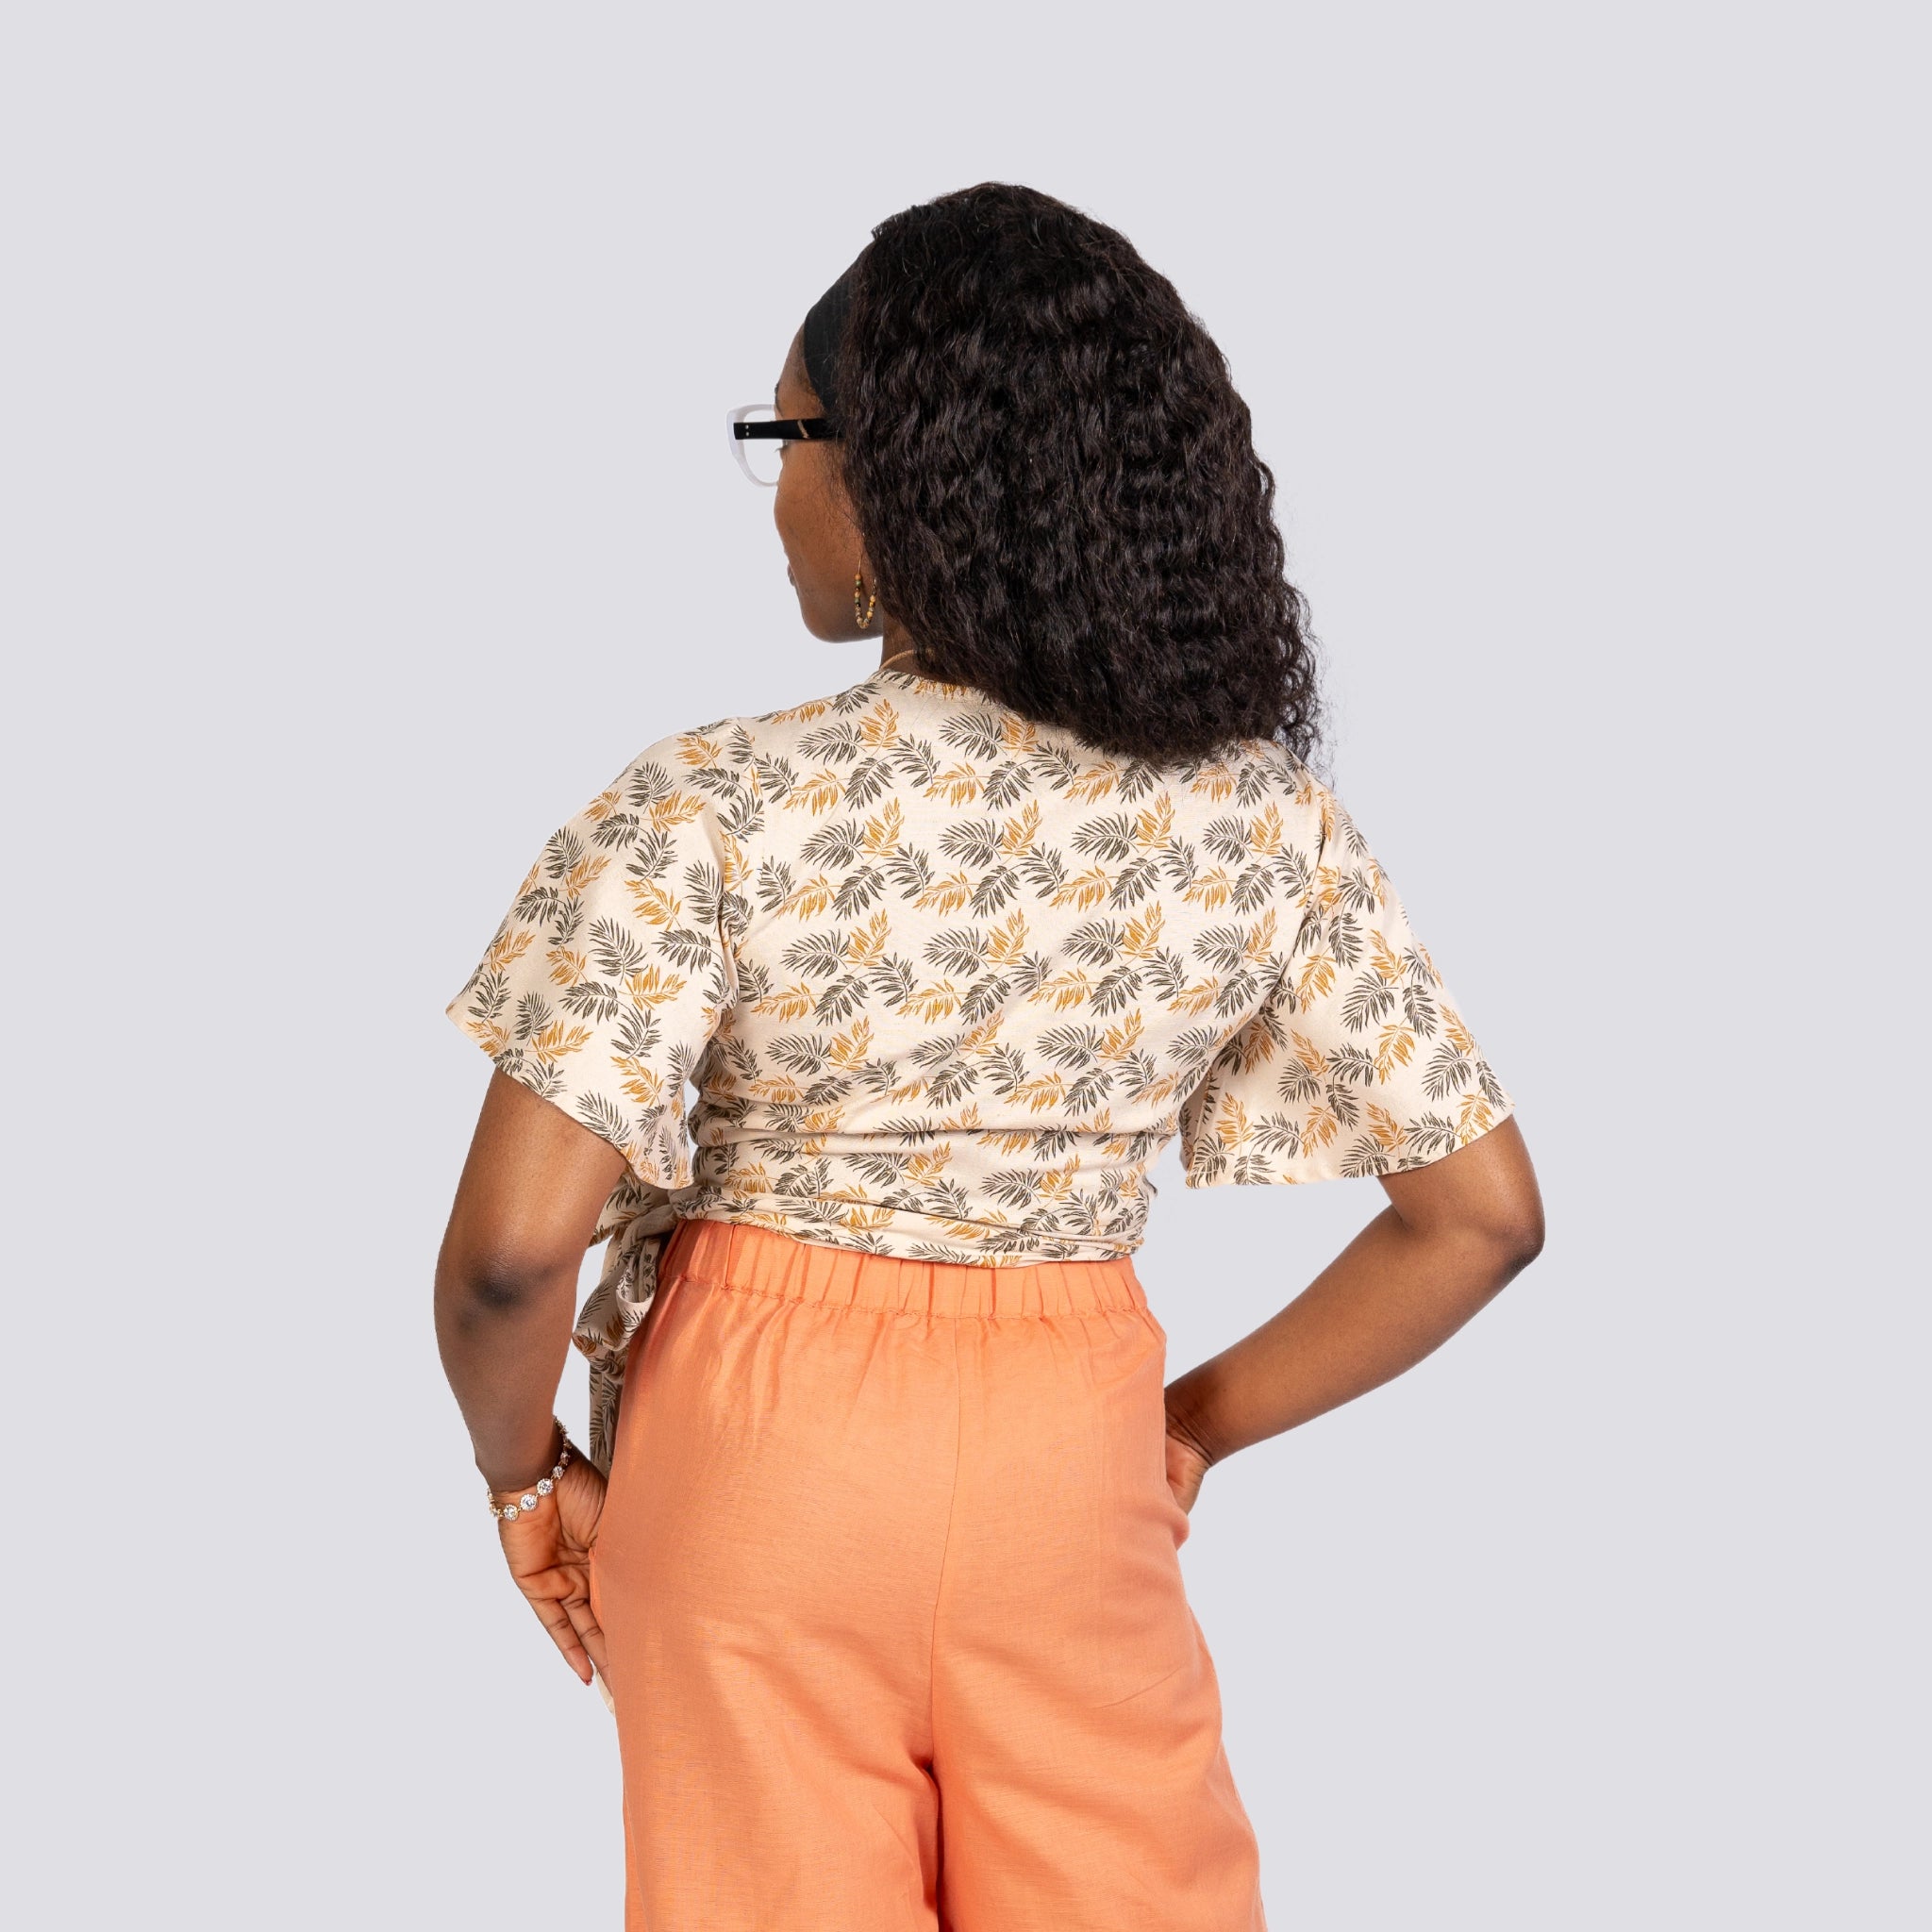 A woman viewed from behind, wearing glasses and dressed in a ChicPalms Women's Eco-Friendly Wrap Top - Biscuit Bliss and orange pants, standing against a gray background.